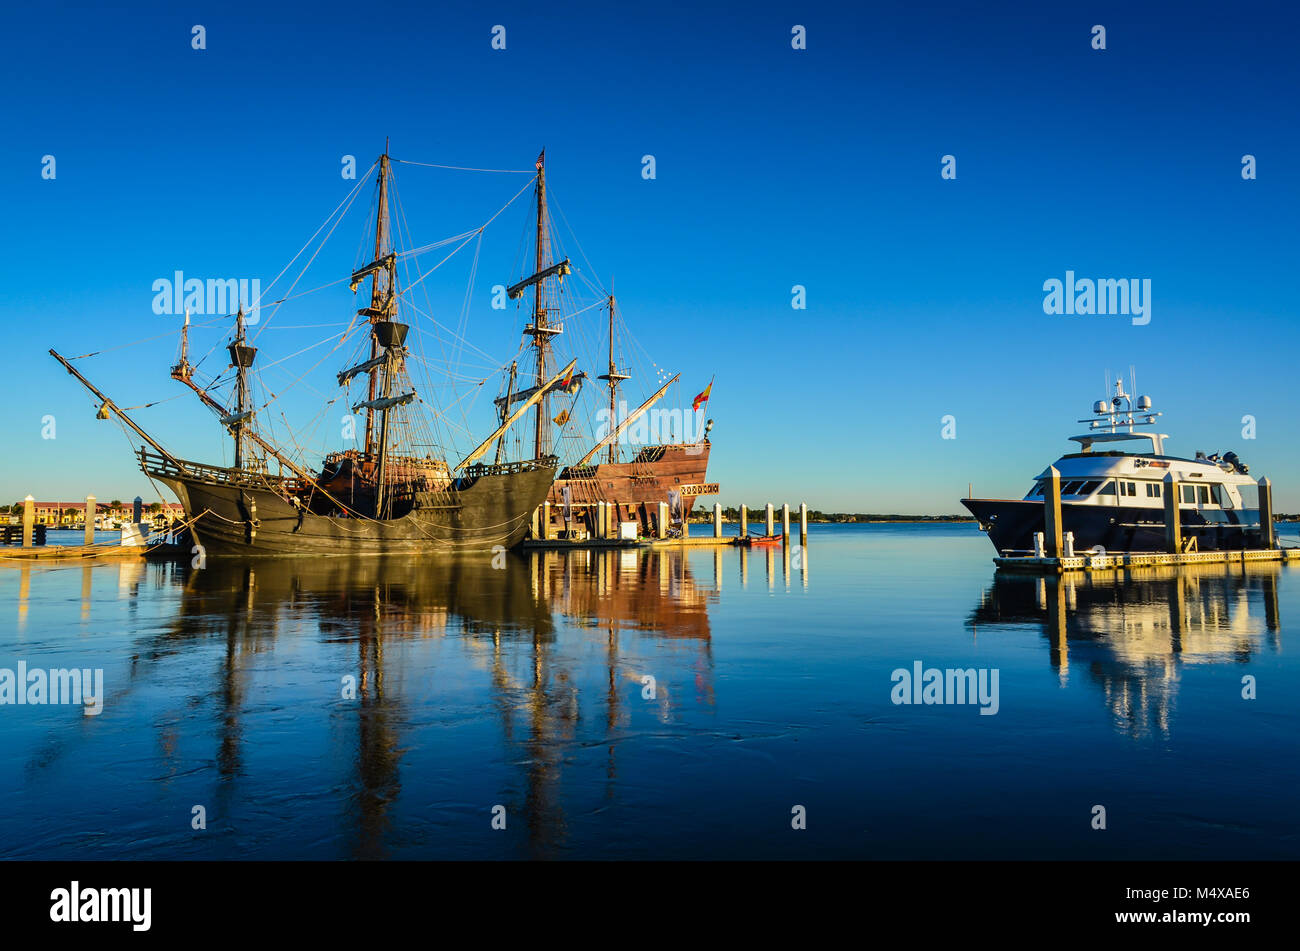 The Spanish tall ship is a 170 foot, 495 ton, authentic wooden  replica of a 16th century galleon that was part of Spain’s West Indies fleet. Now it t Stock Photo